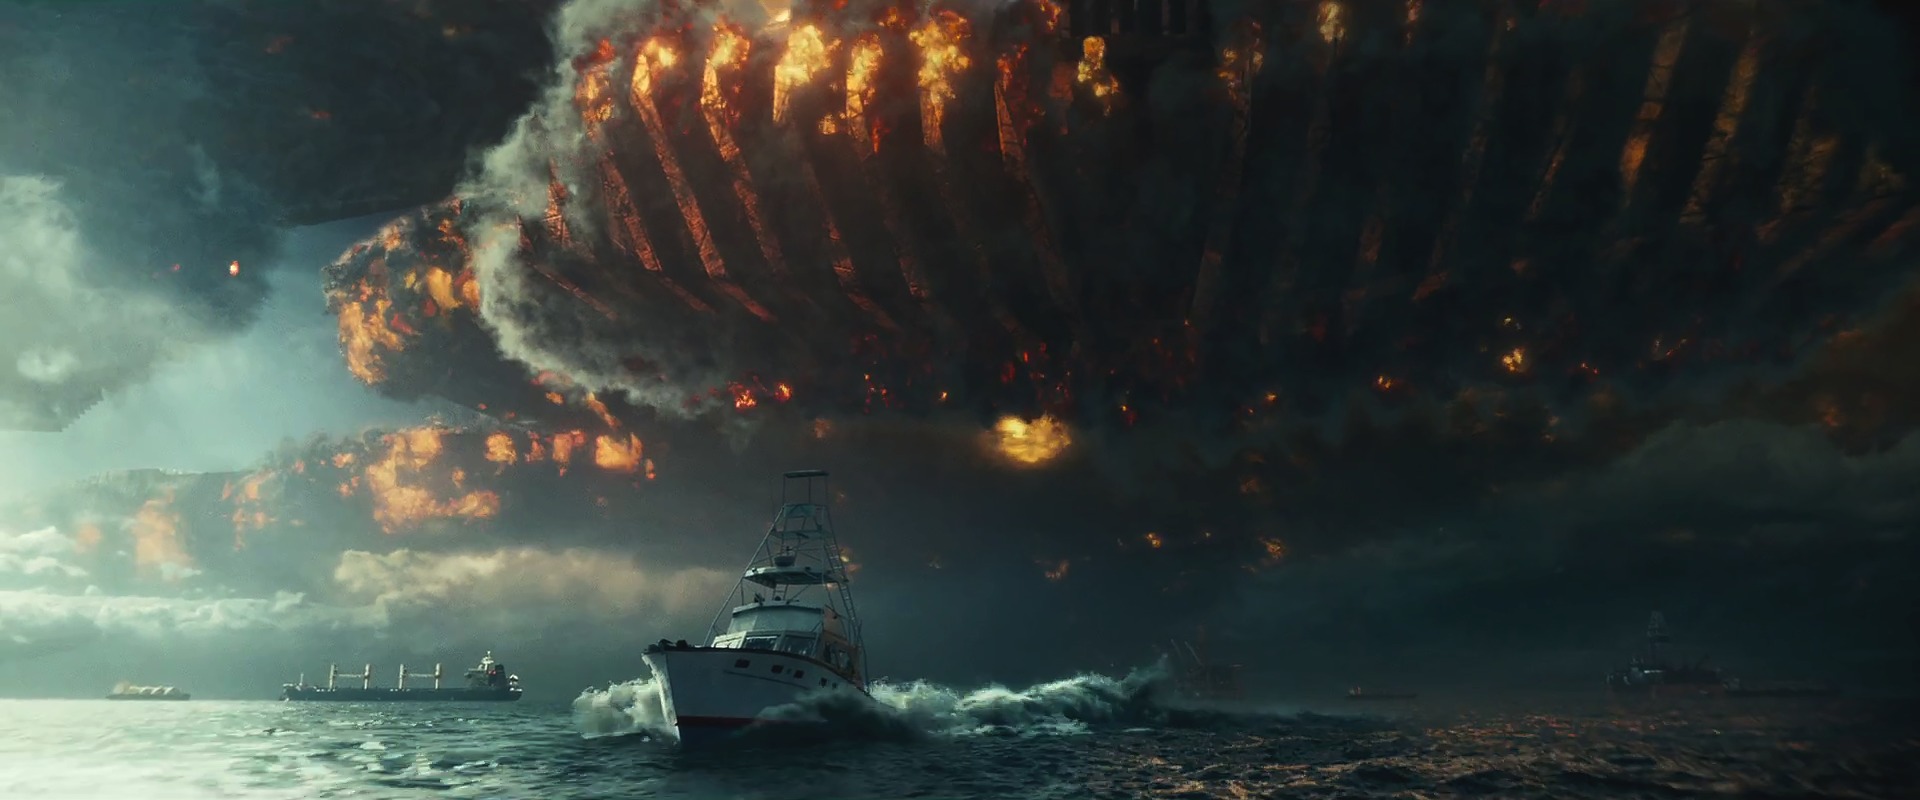 Aliens are back in first ‘Independence Day: Resurgence’ trailer